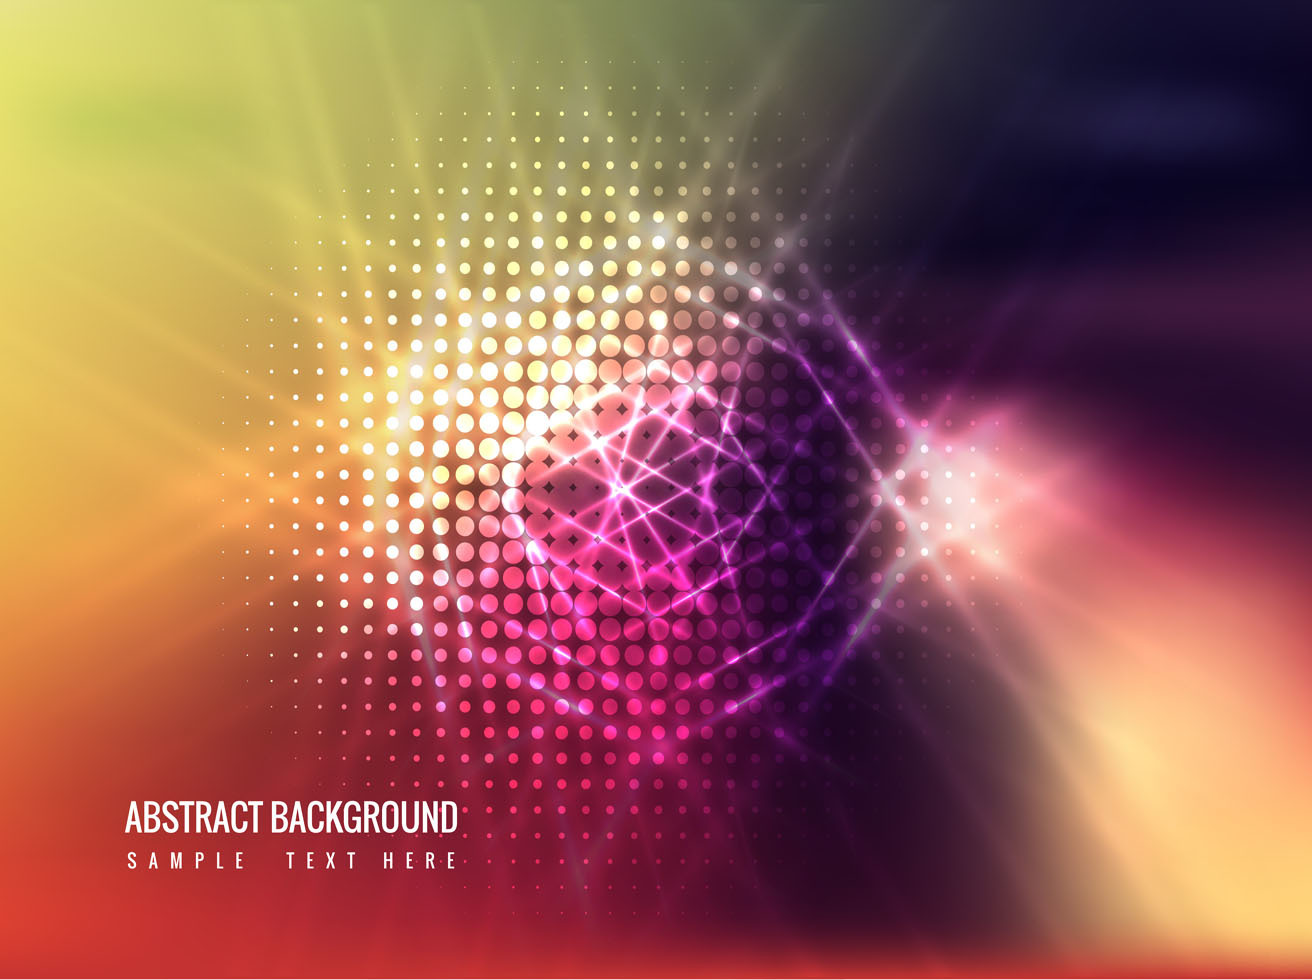 Free Vector Colorful Shiny Background